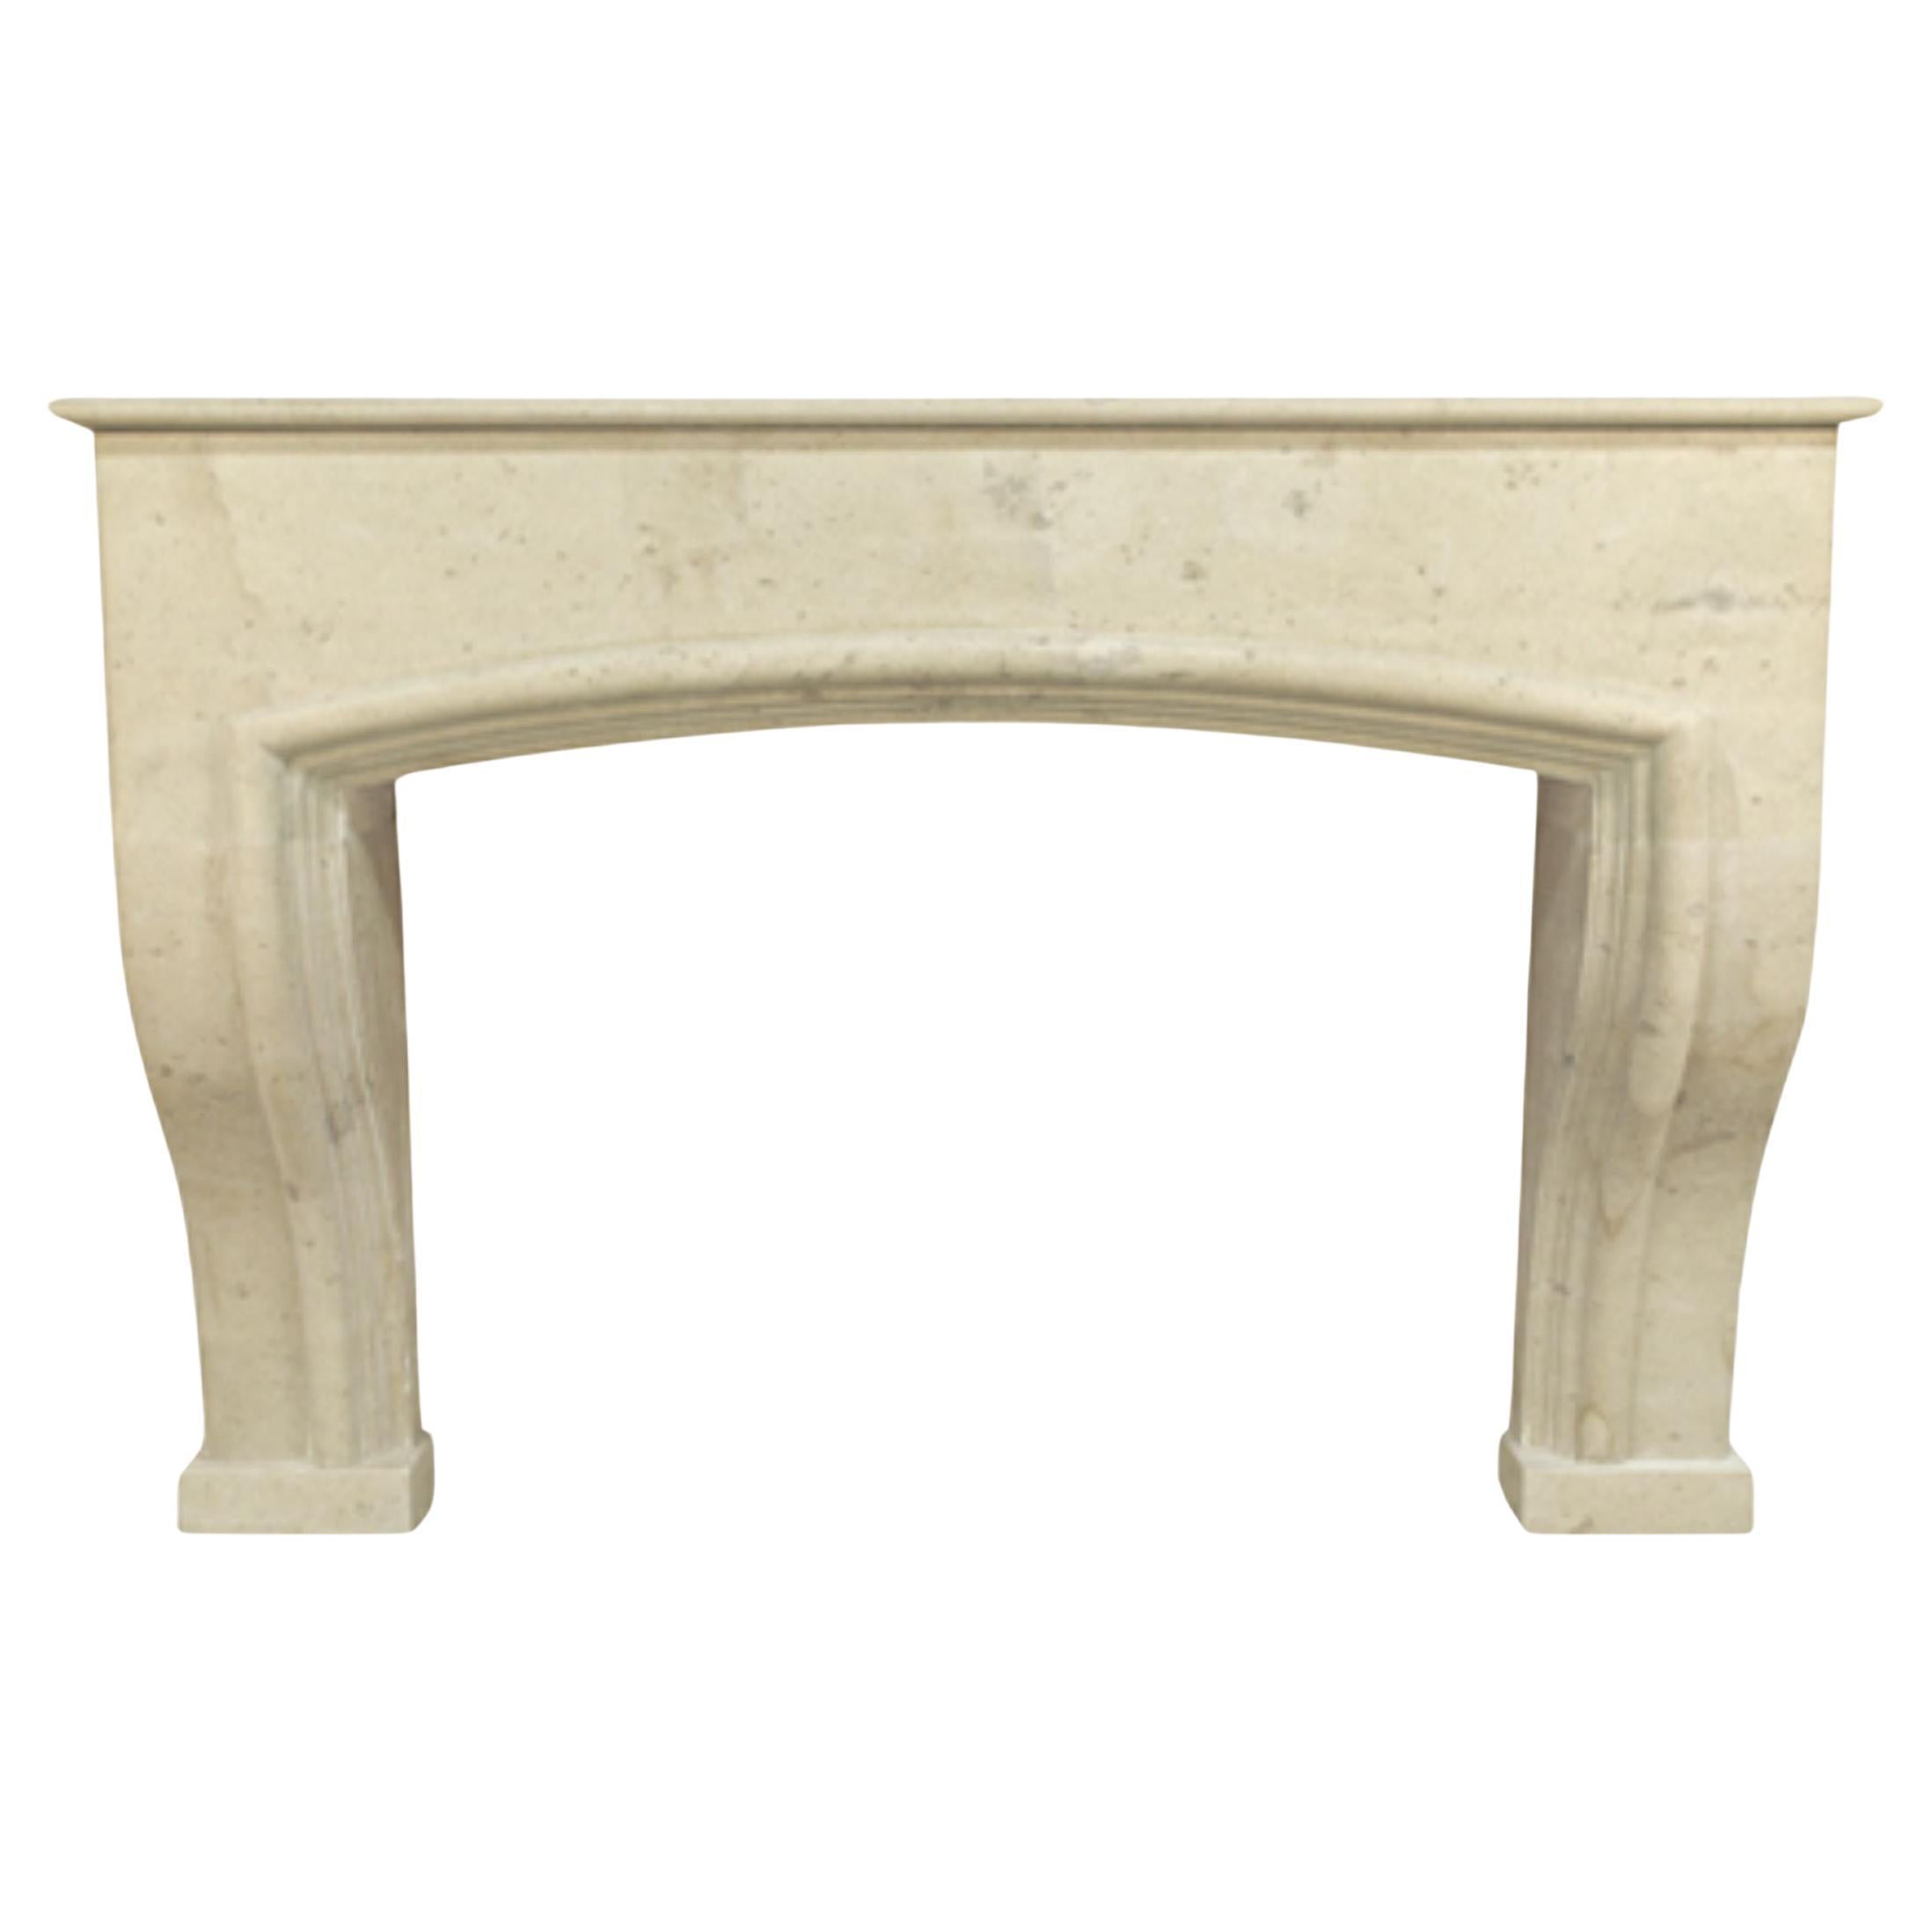 The Bourgogne: A Classic French Stone Fireplace